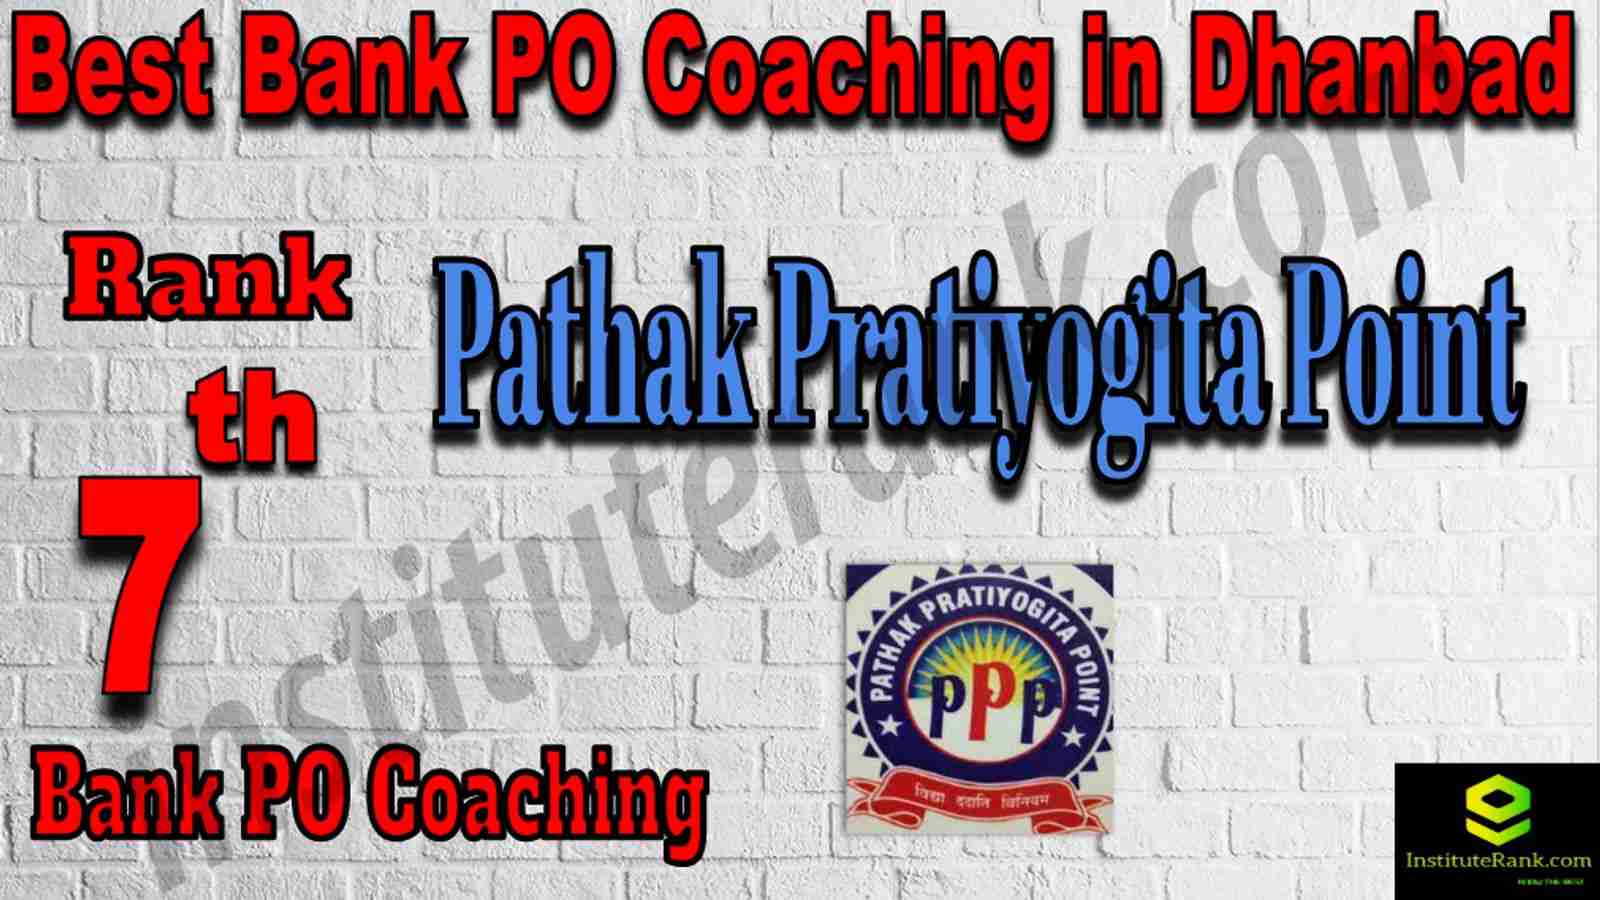 7th Best Bank PO Coaching in Dhanbad